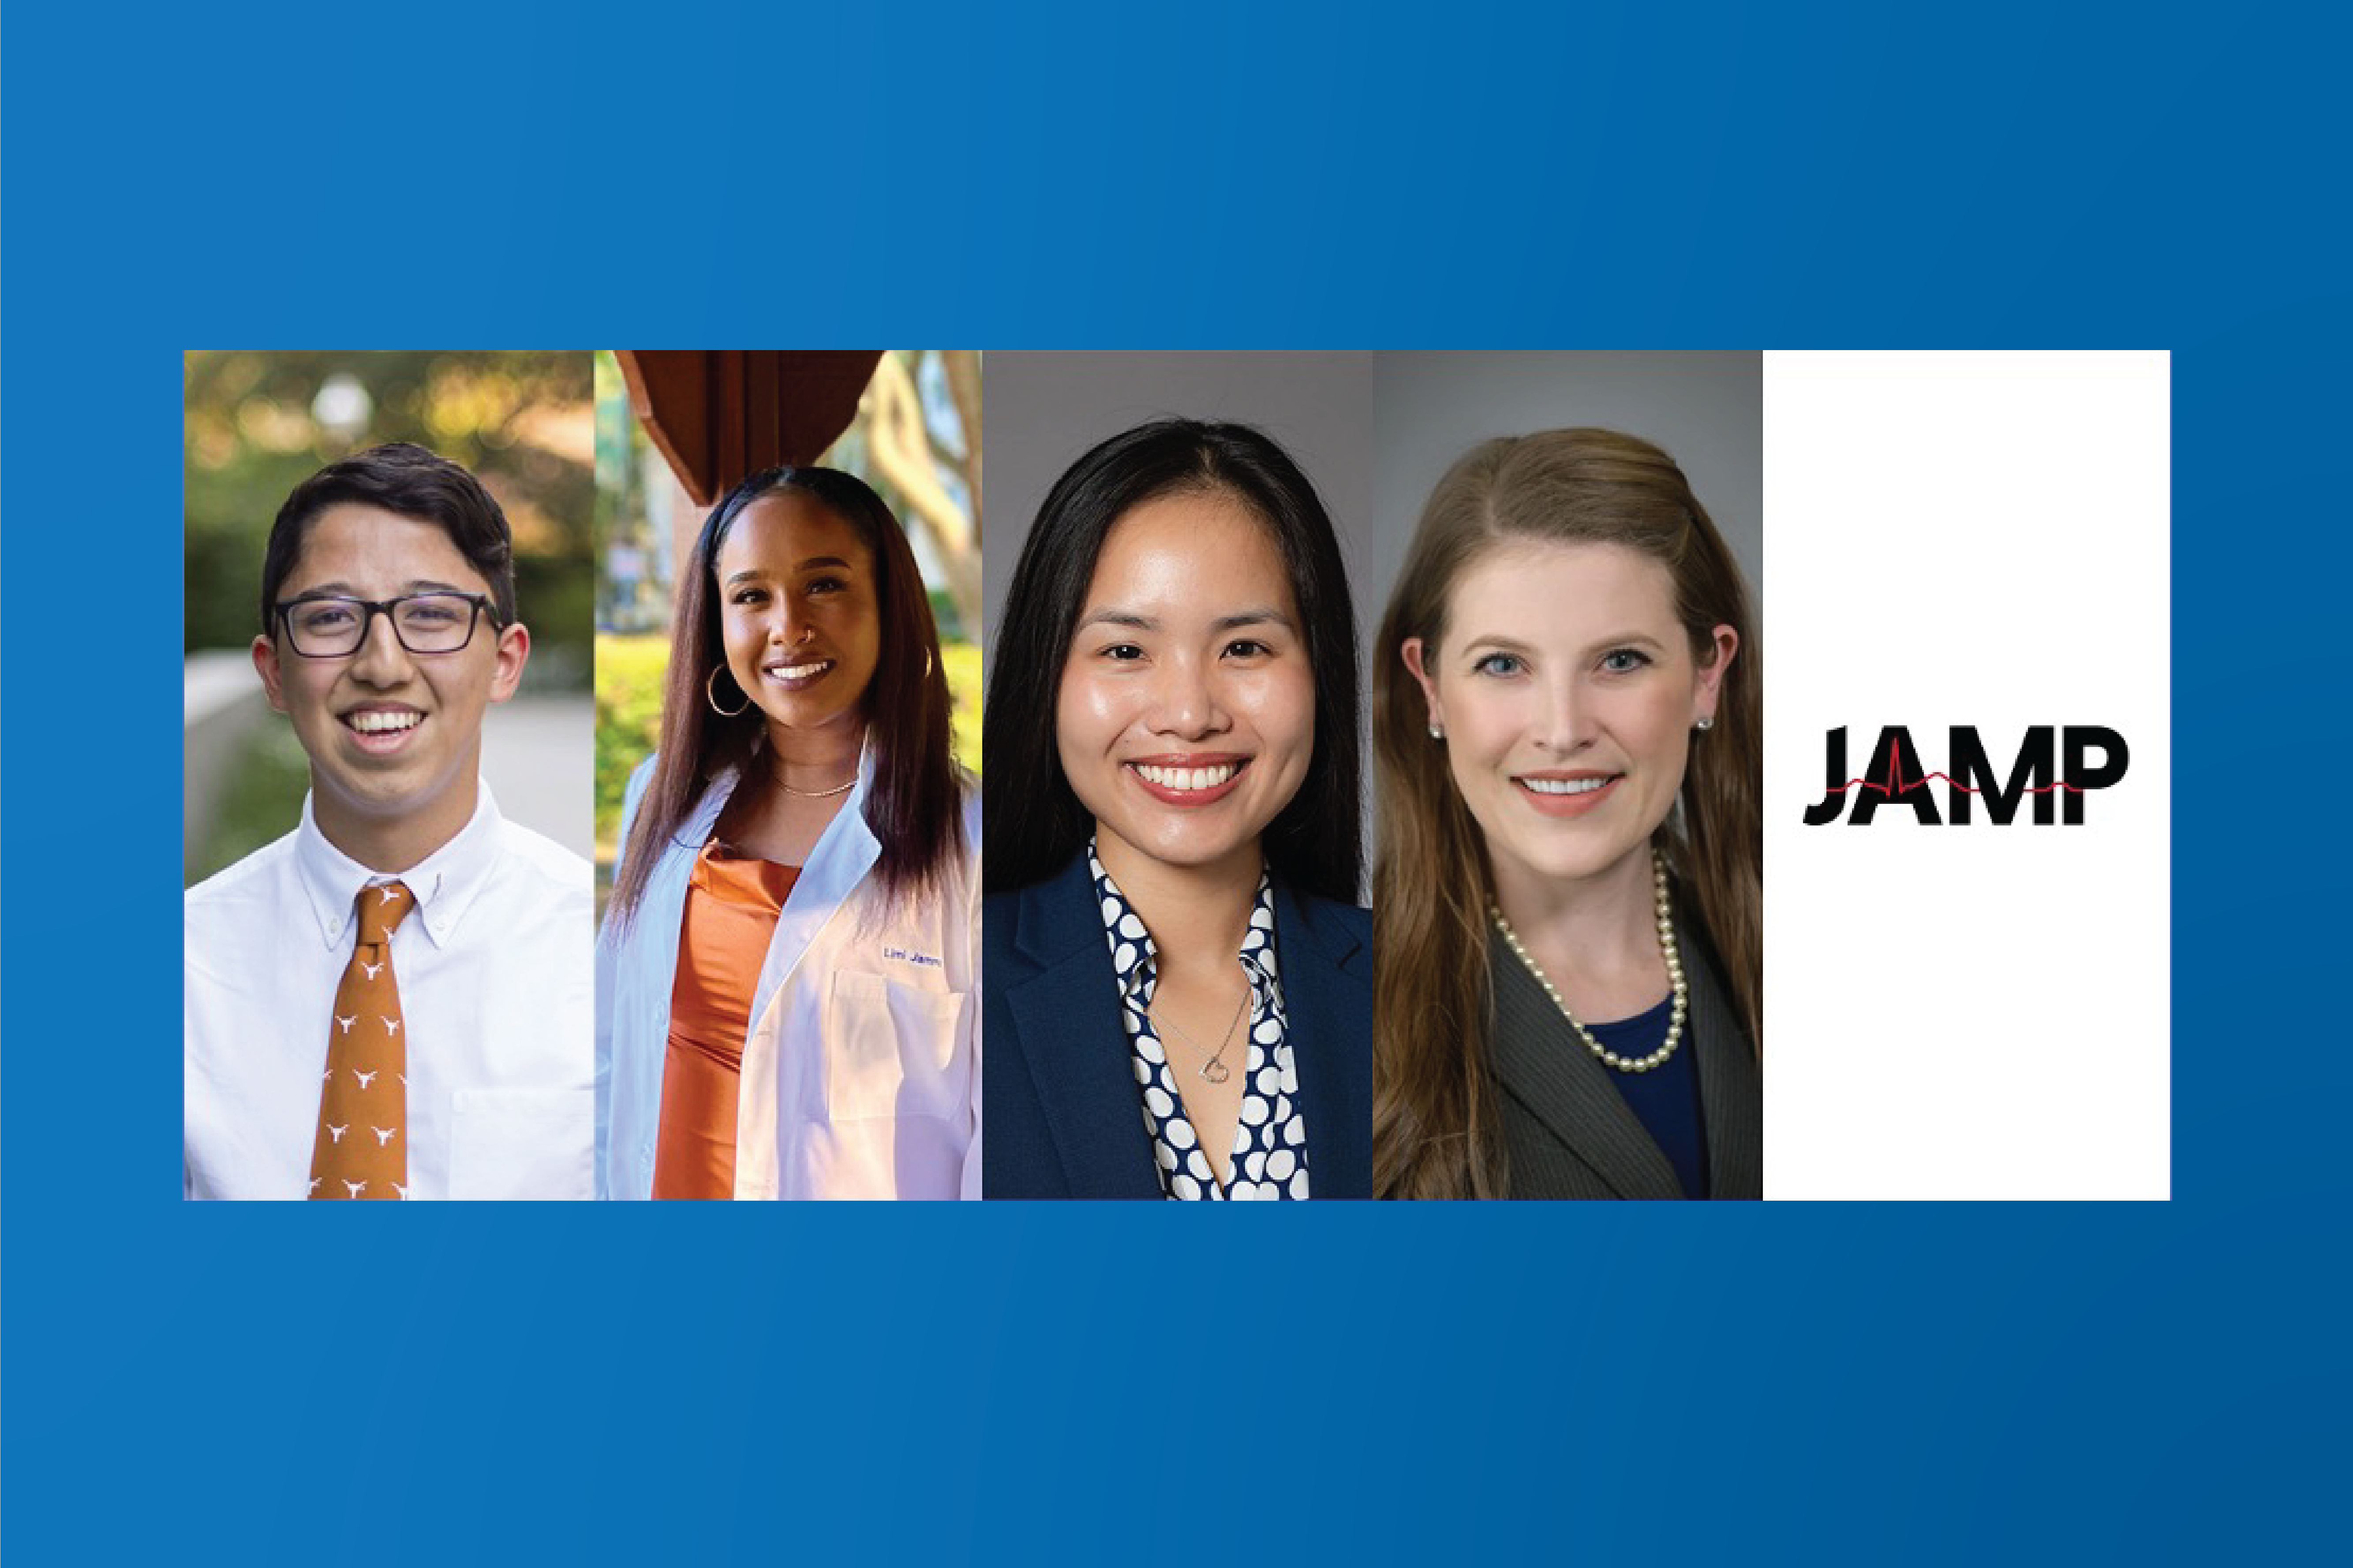 Joint Admission Medical Program (JAMP) participants include these current or former UT Southwestern Medical School students.